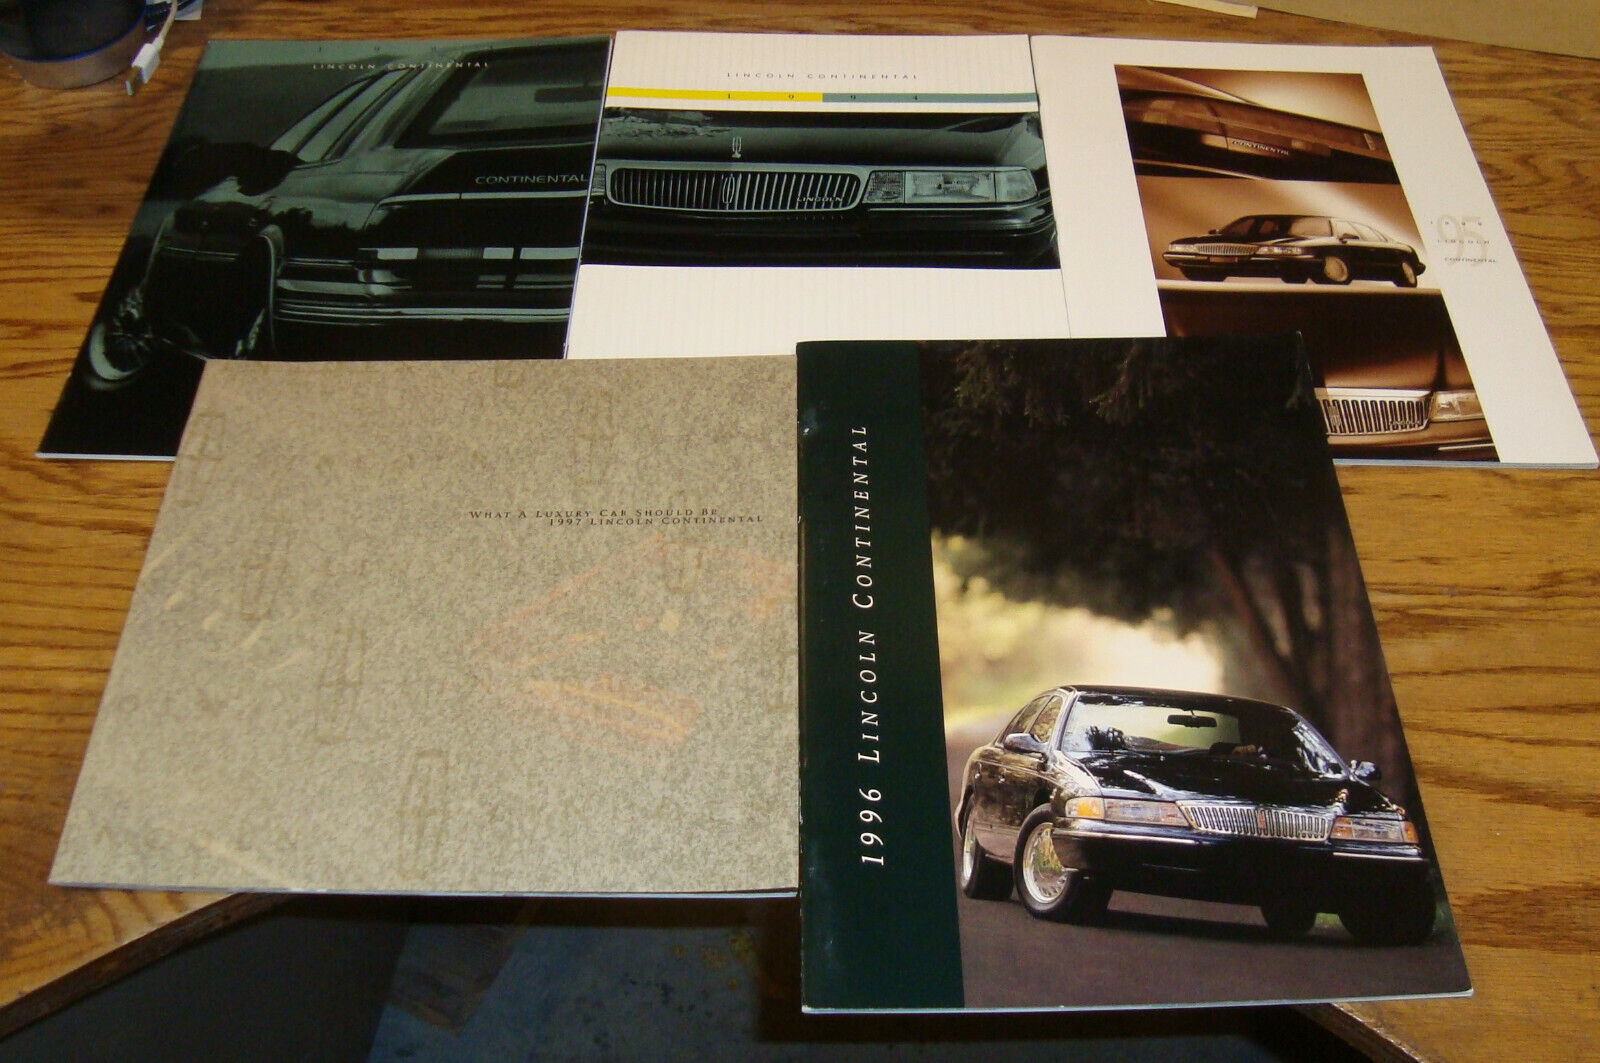 1993 1994 1995 1996 1997 Lincoln Continental Deluxe Sales Brochure Lot of 5